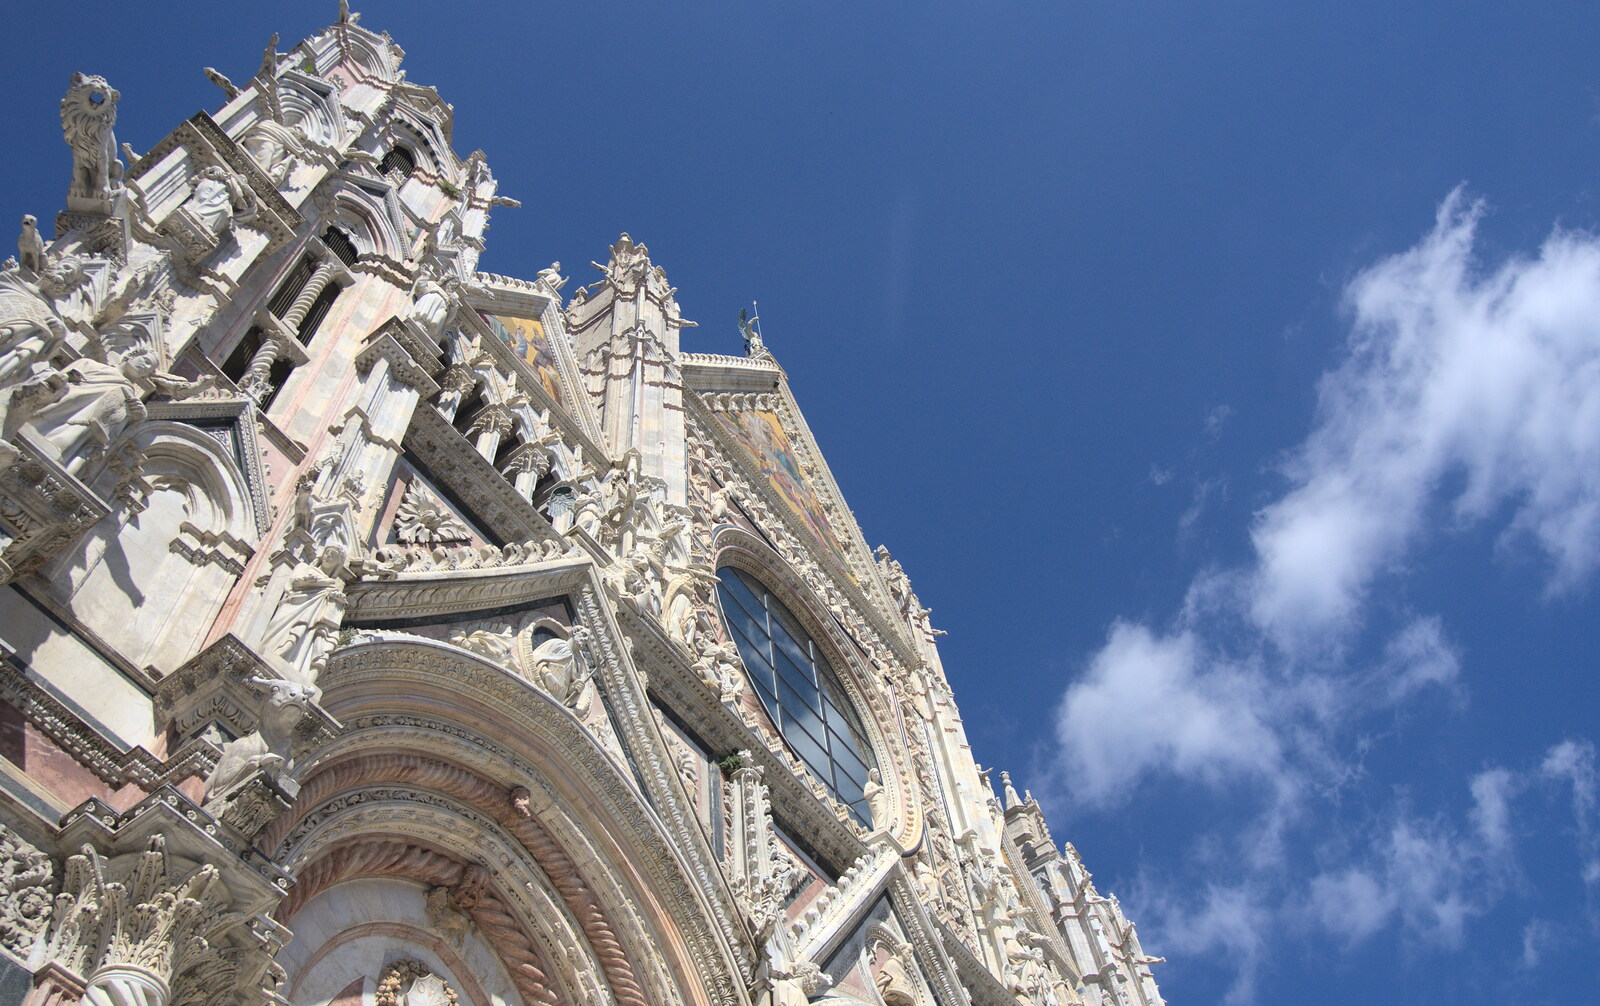 A Tuscan Winery and a Trip to Siena, Tuscany, Italy - 10th June 2013: The over-wrought gothic façade of the cathedral